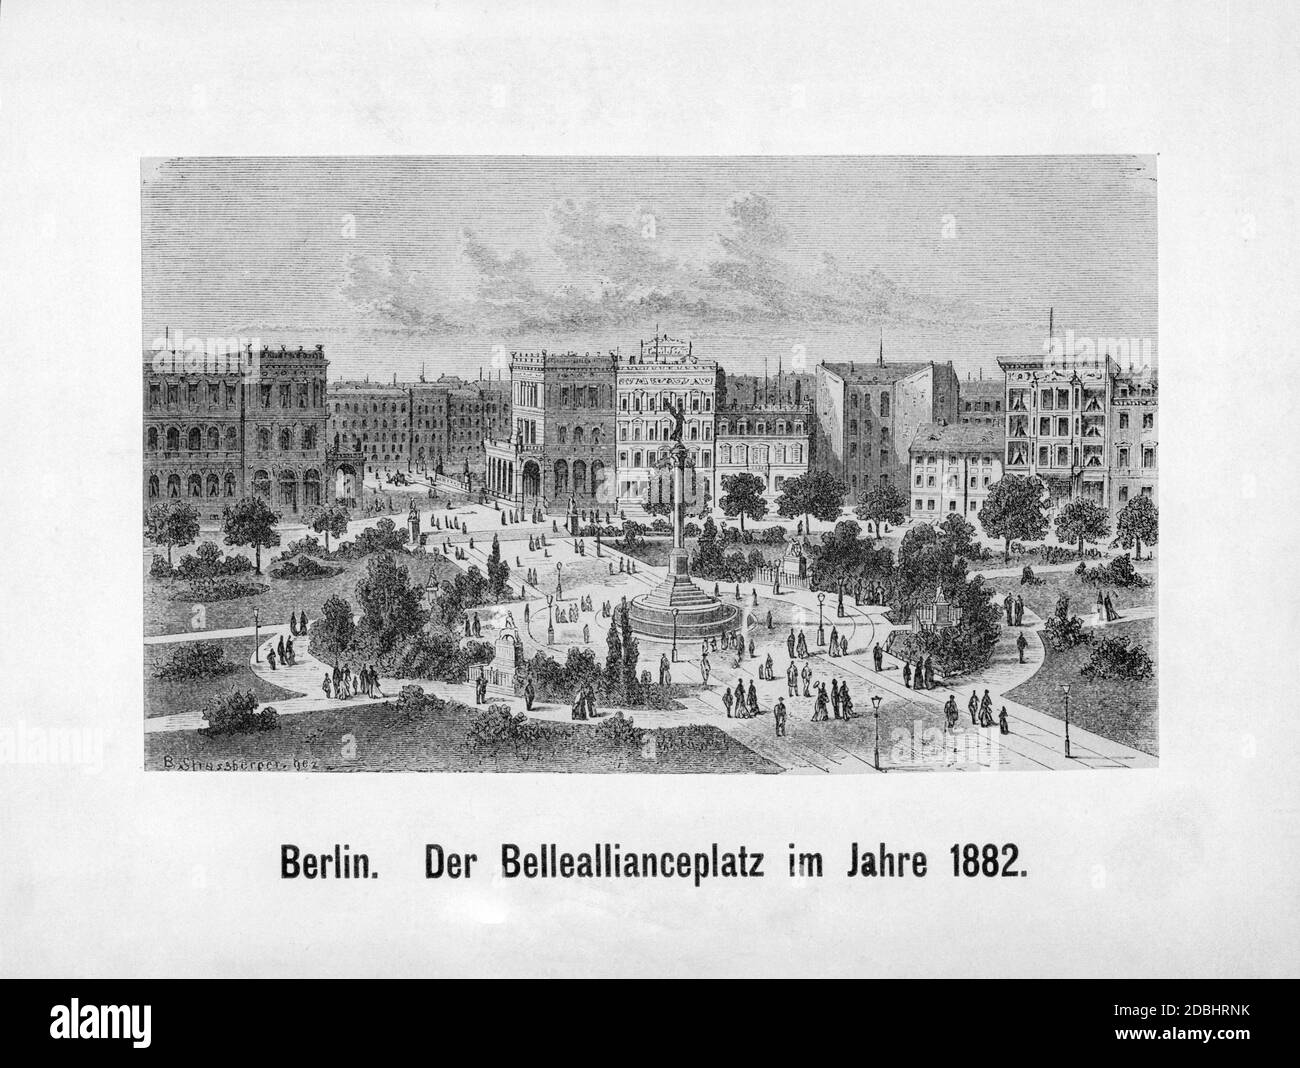 This drawing by B. Strassberger shows the Belle Alliance Square in Berlin (today Mehringplatz) with the Peace Column and a view of the Hallesche Tor in 1882. Stock Photo